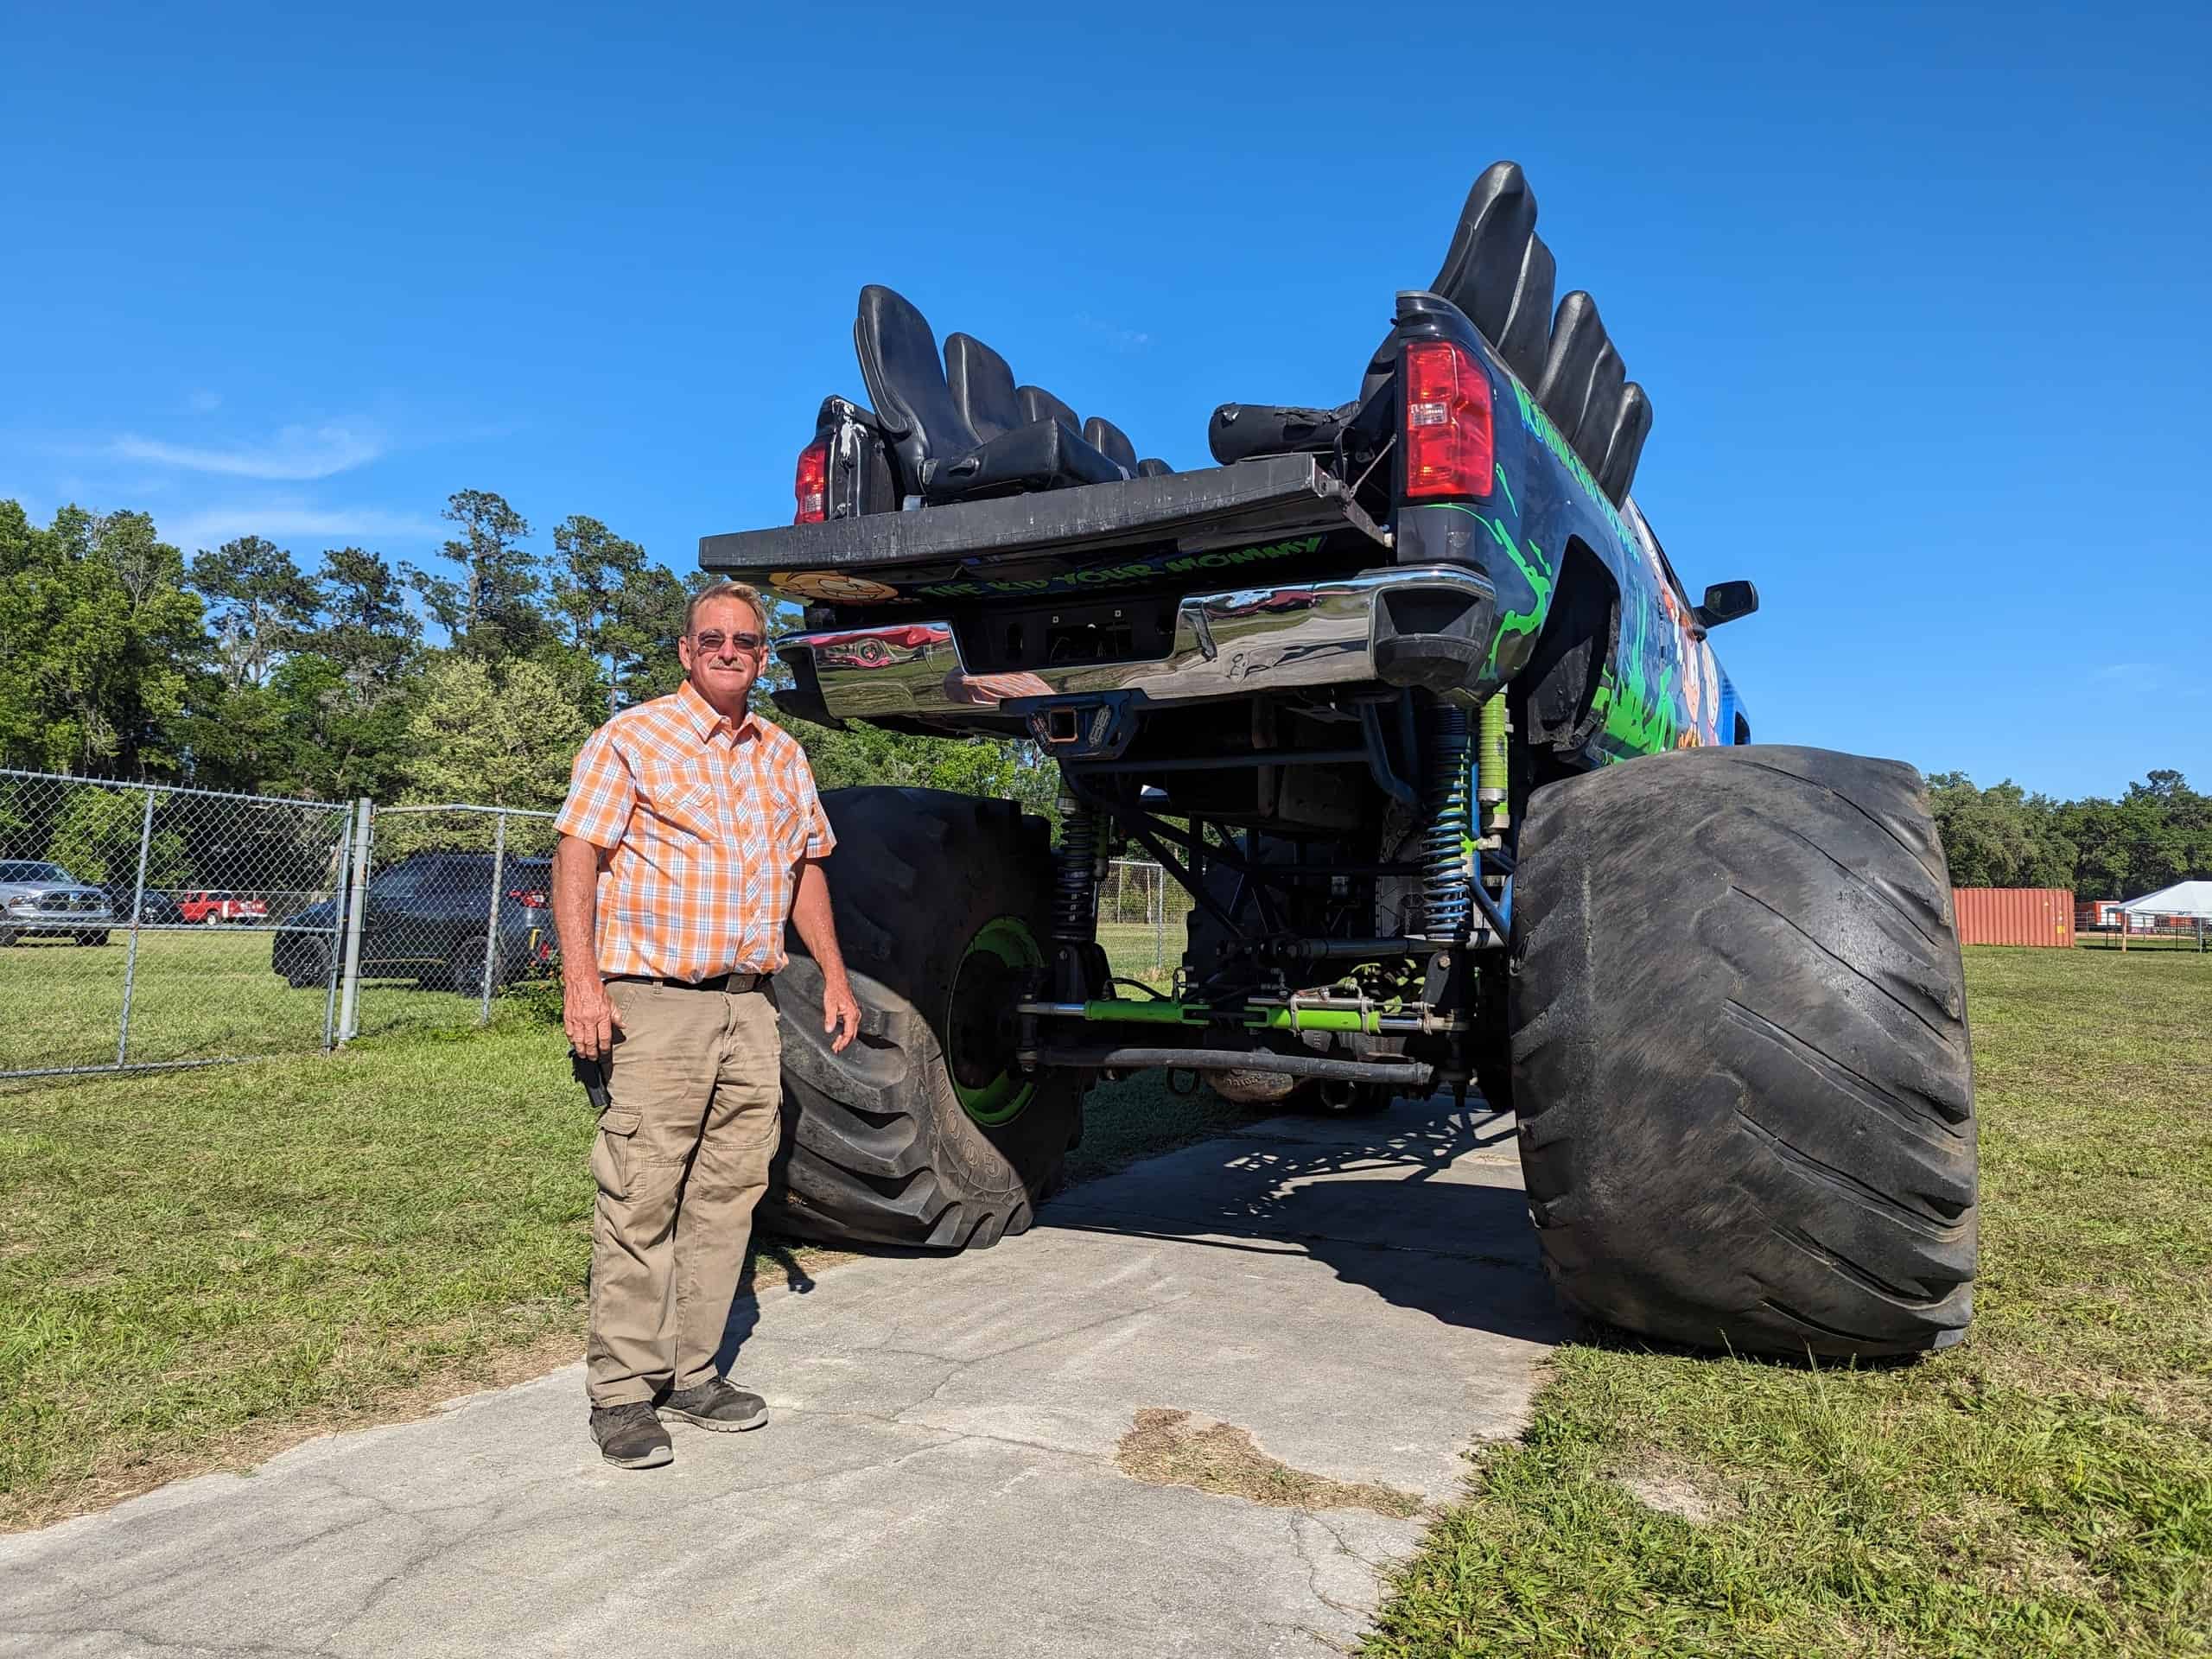 Fair organizer Richard Klimas in front of the monster truck to demonstrate size